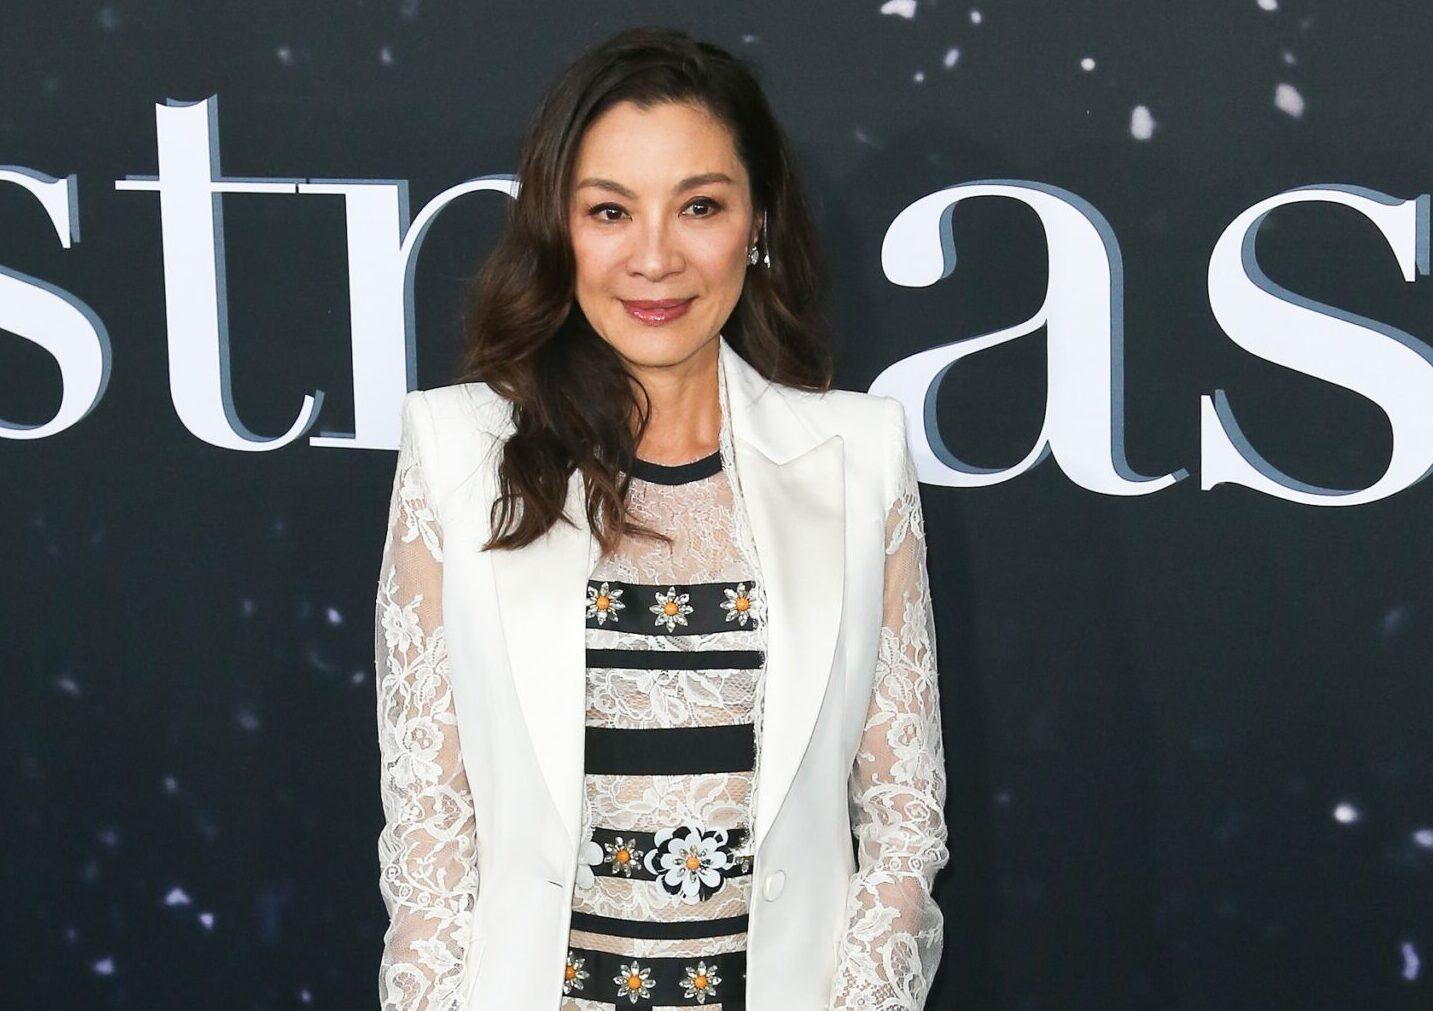 Michelle Yeoh attends the "Last Christmas" premiere at AMC Lincoln Square in New York City.